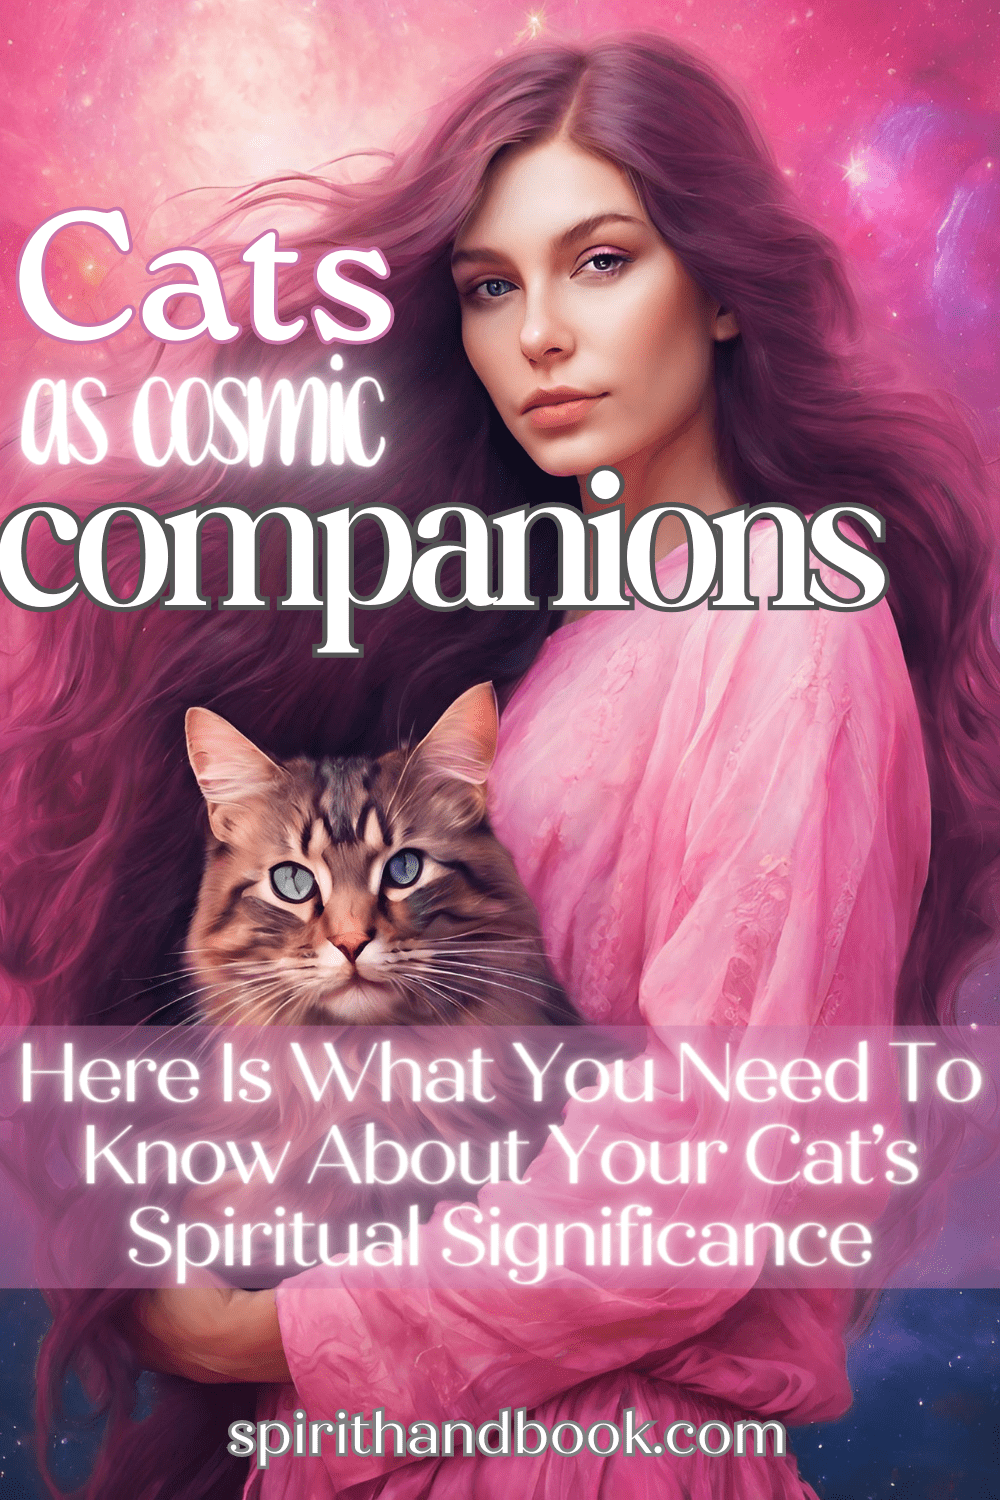 Cats As Cosmic Companions: Here Is What You Need To Know About Your Cat’s Spiritual Significance